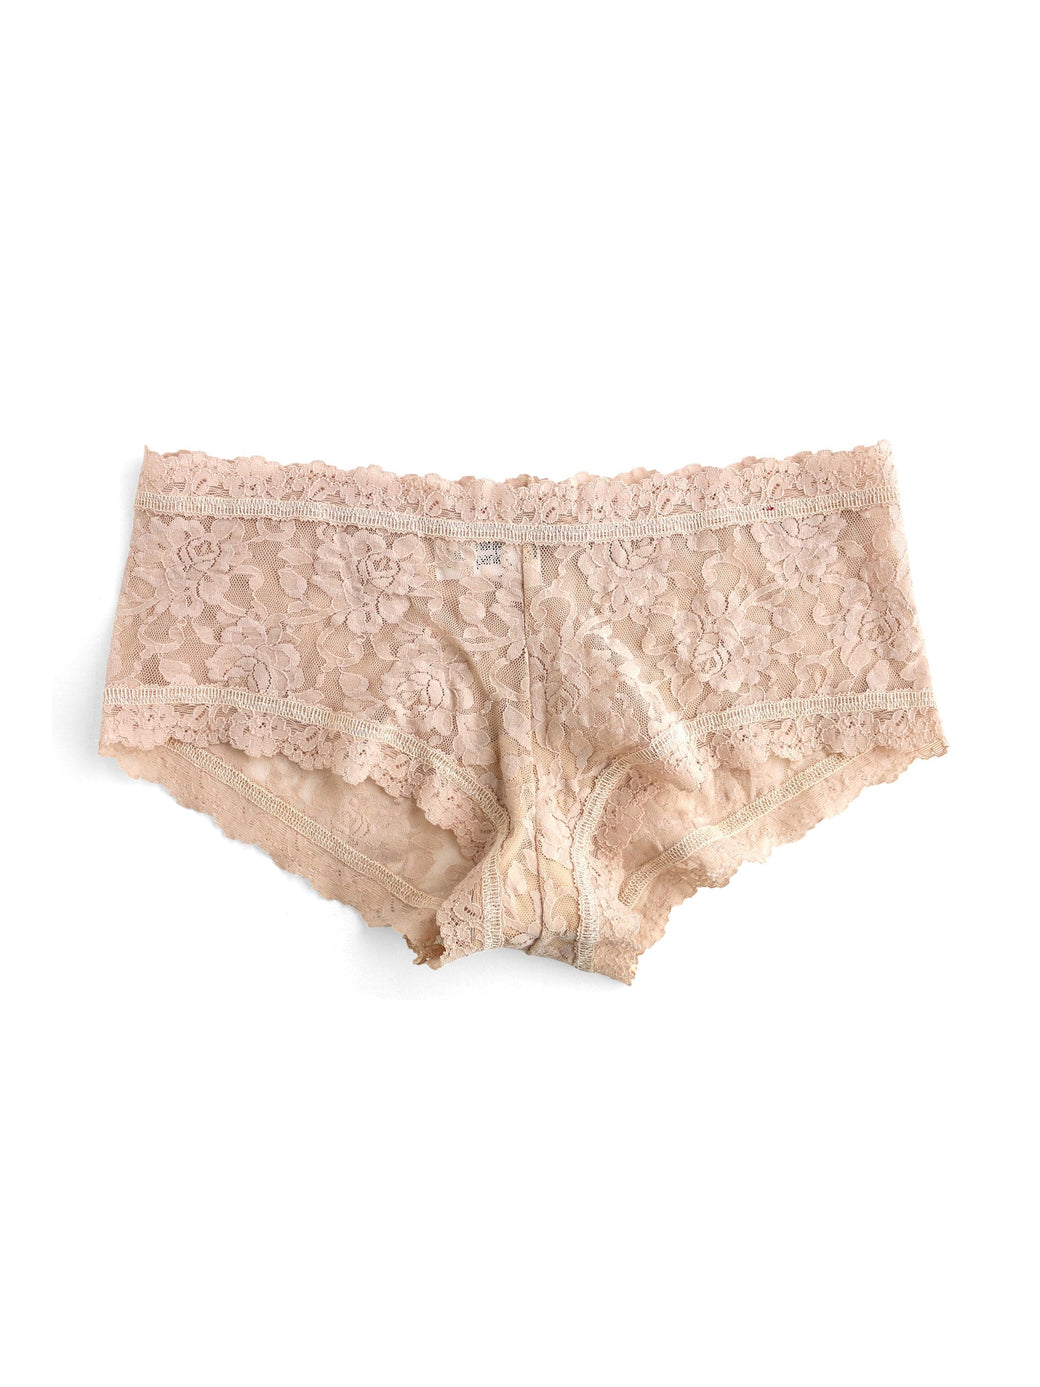 Hanky Panky Signature Lace Boyshort in Chai, available at LaSource in Darien.